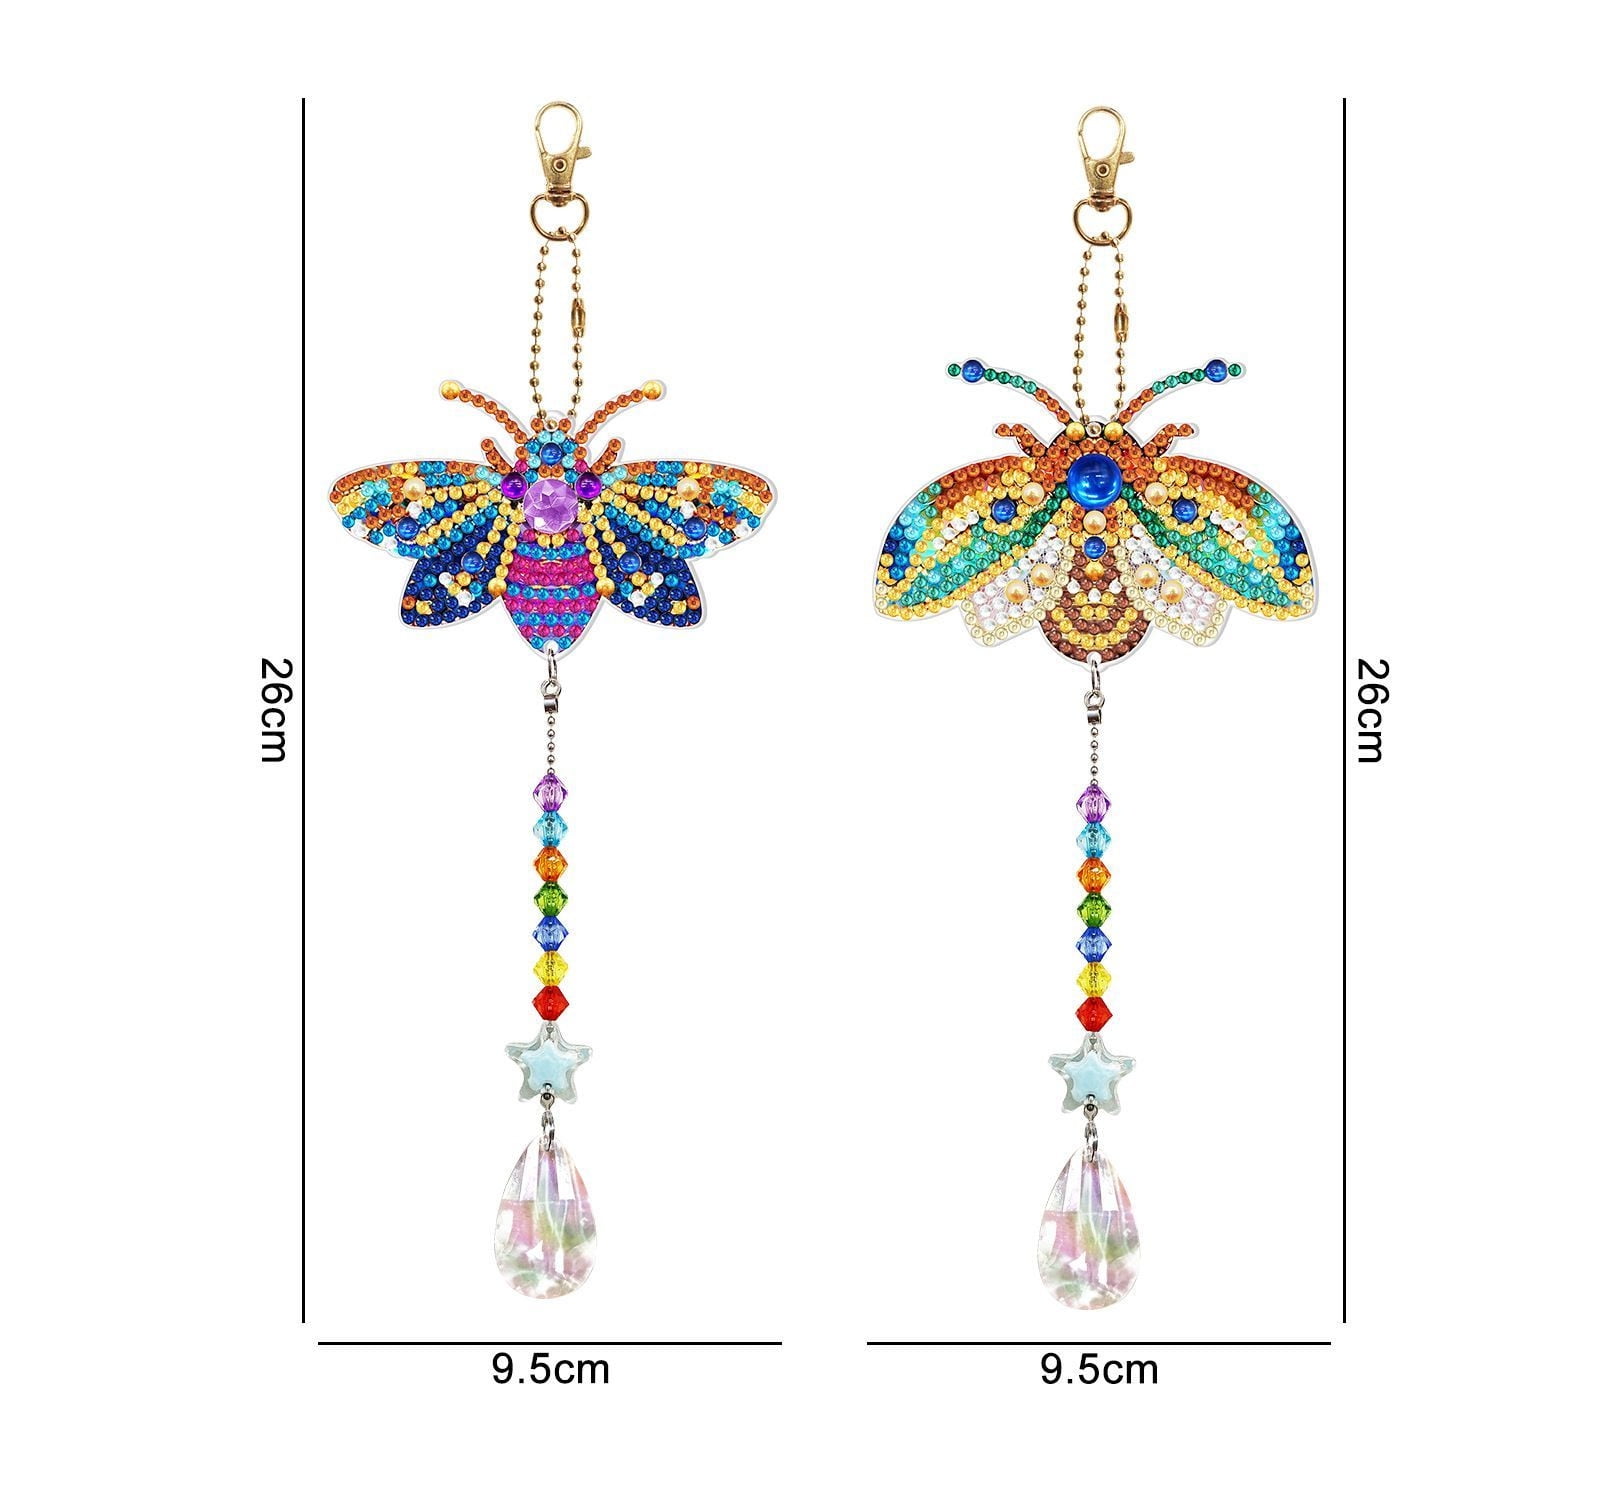  Kigley 12 Pcs Diamond Painting Suncatcher Butterfly Diamond  Painting Kits Diamond Art for Kids Double Sided DIY Wind Chime Kit Paint by  Number Hanging Ornaments for Adults Home Garden Supplies 